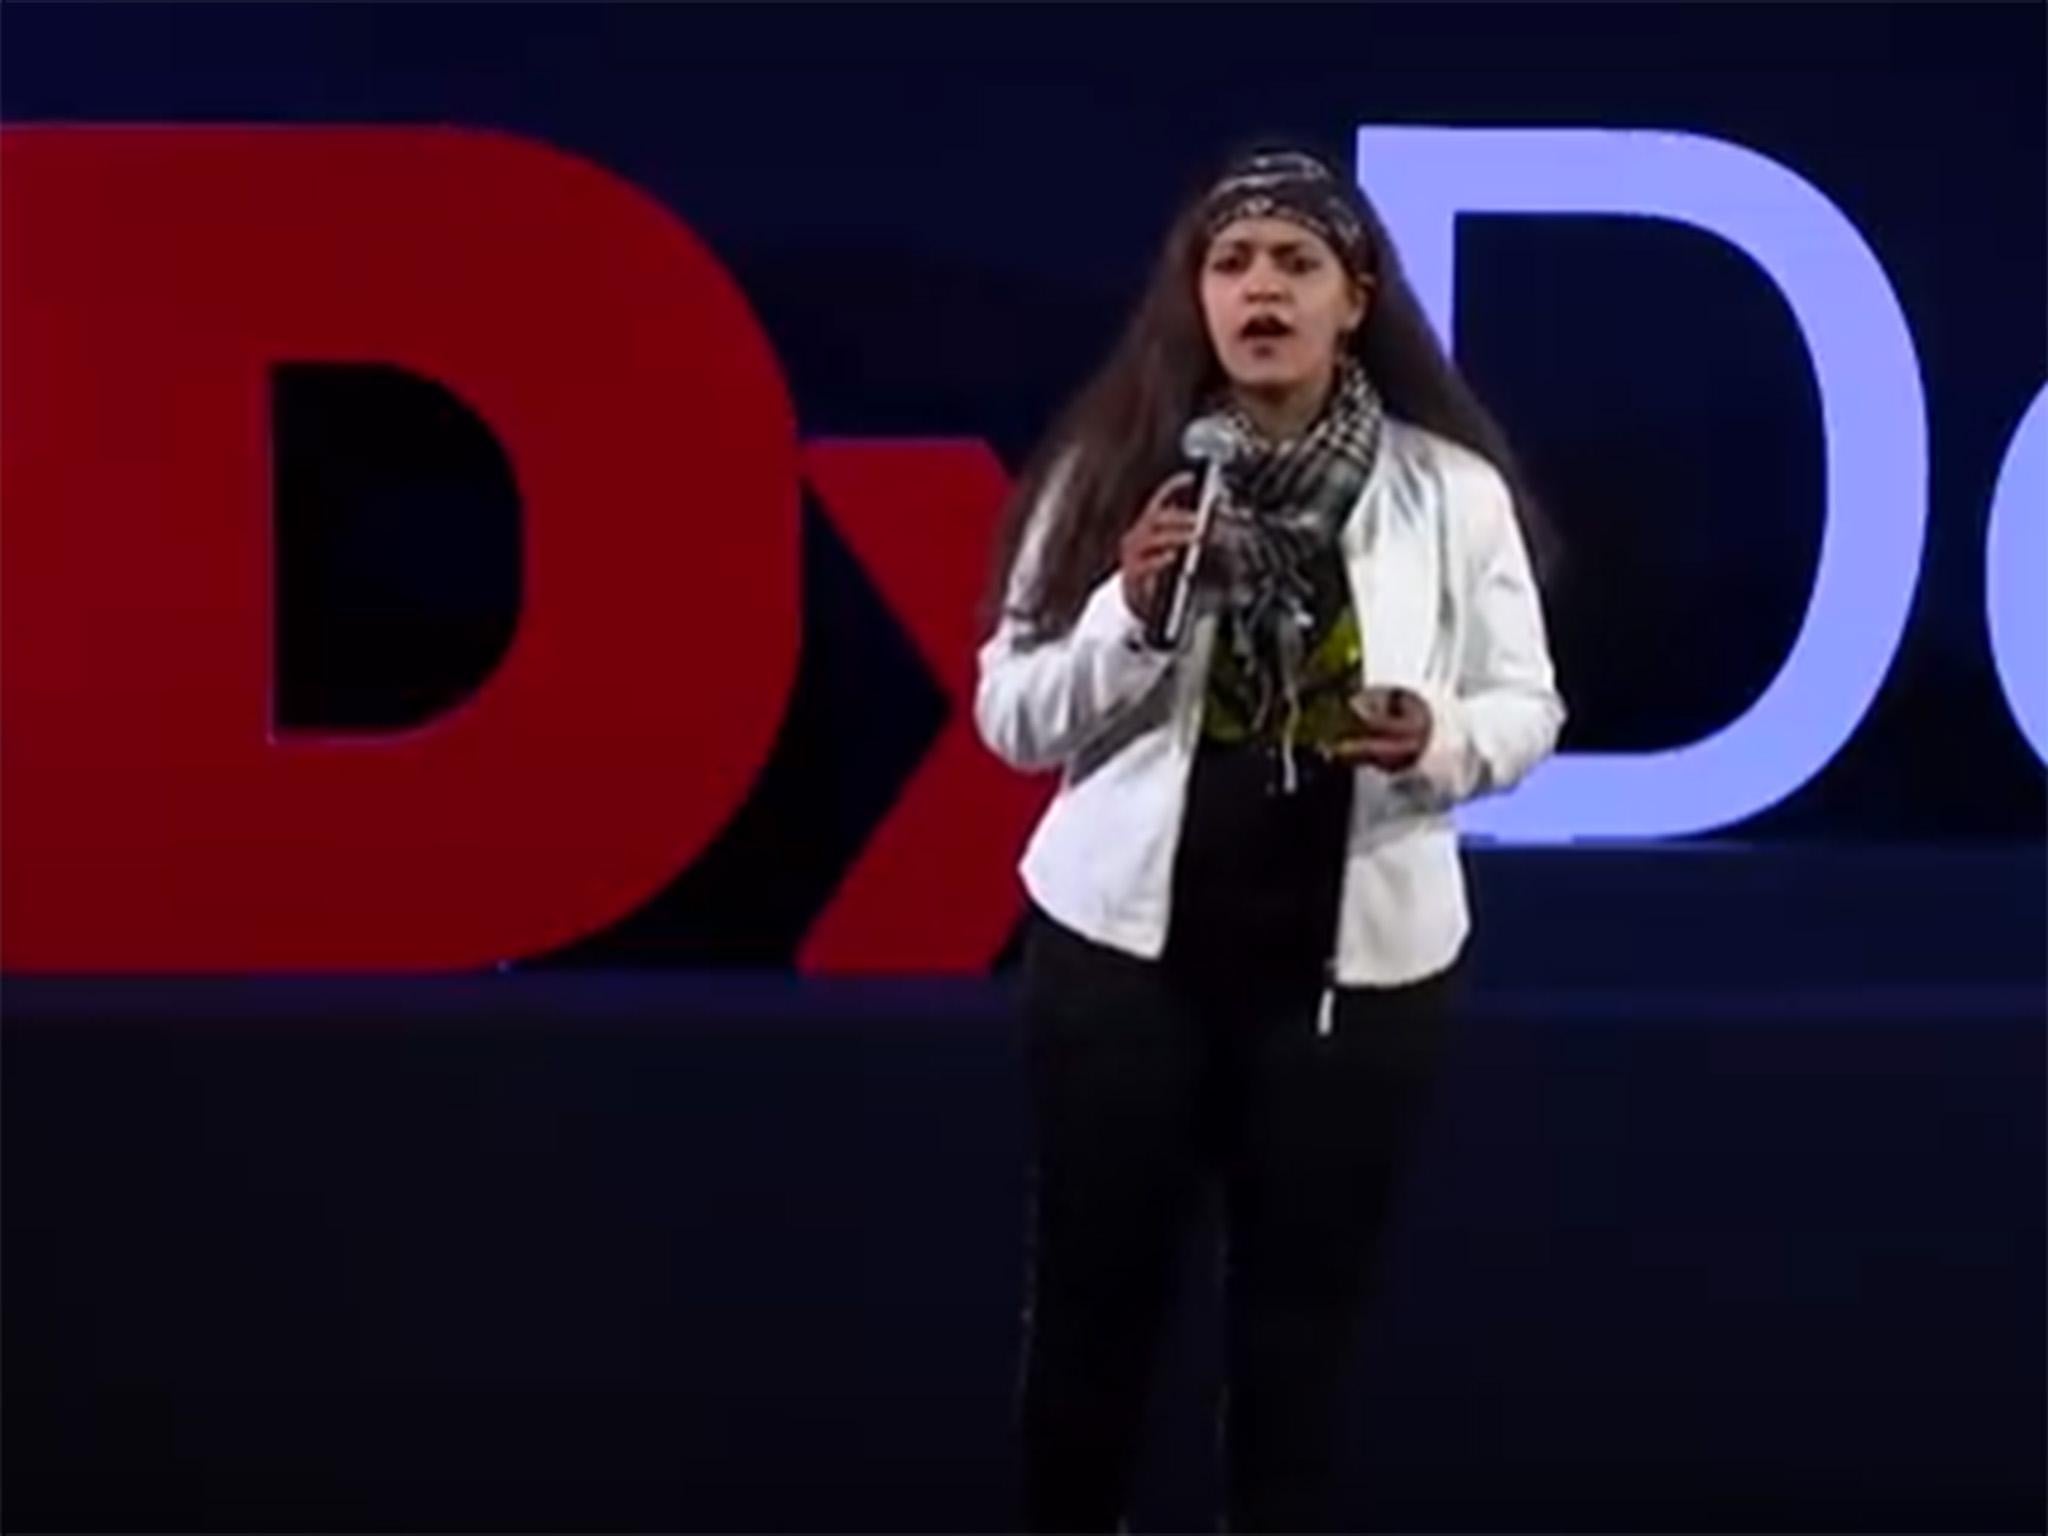 Iqbal giving a TEDx talk in Delhi in June 2017 on her efforts to raise awareness around suicide prevention